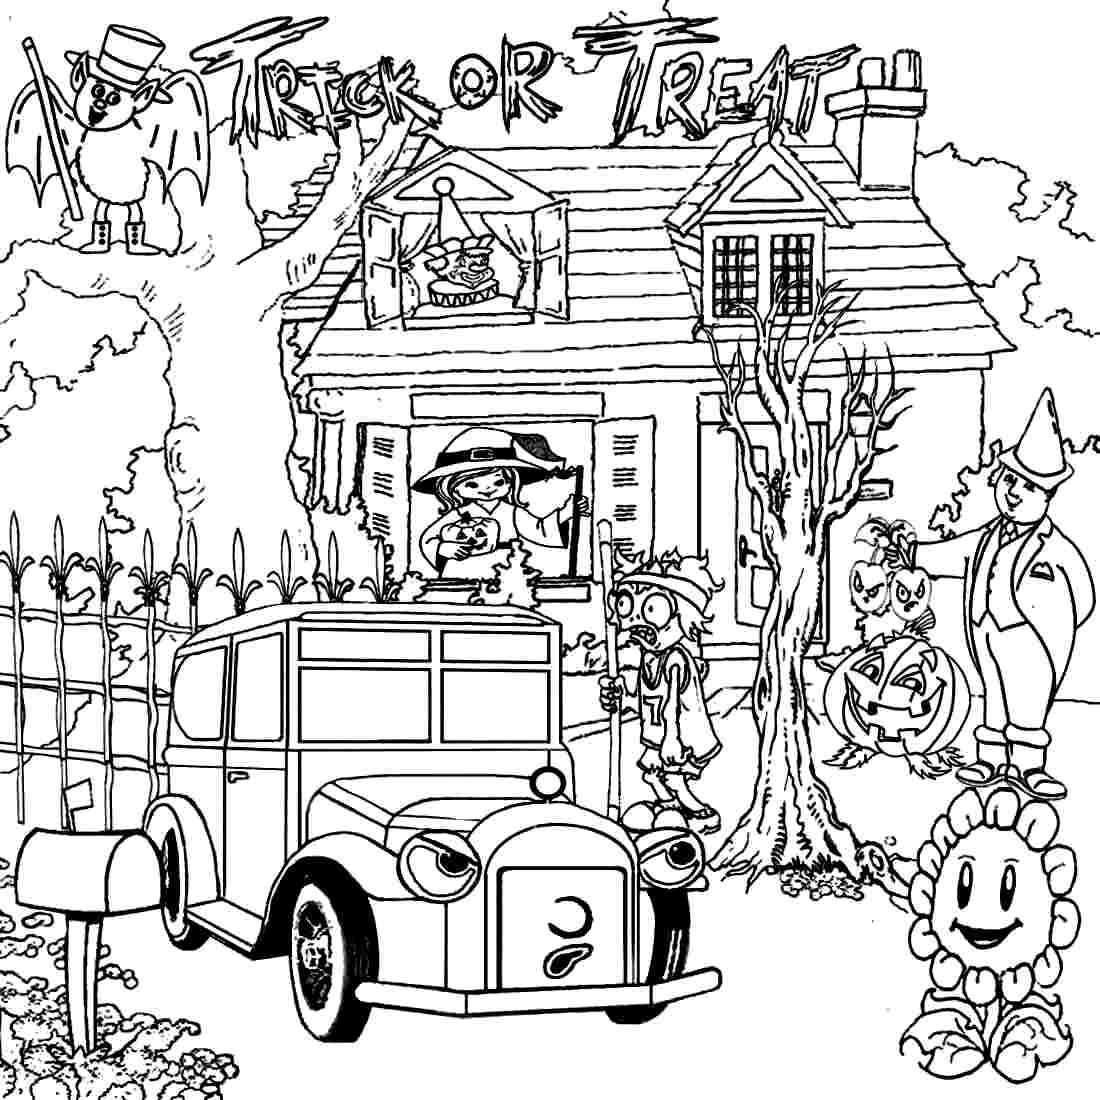 Halloween Haunted House Coloring Pages at GetColorings.com | Free